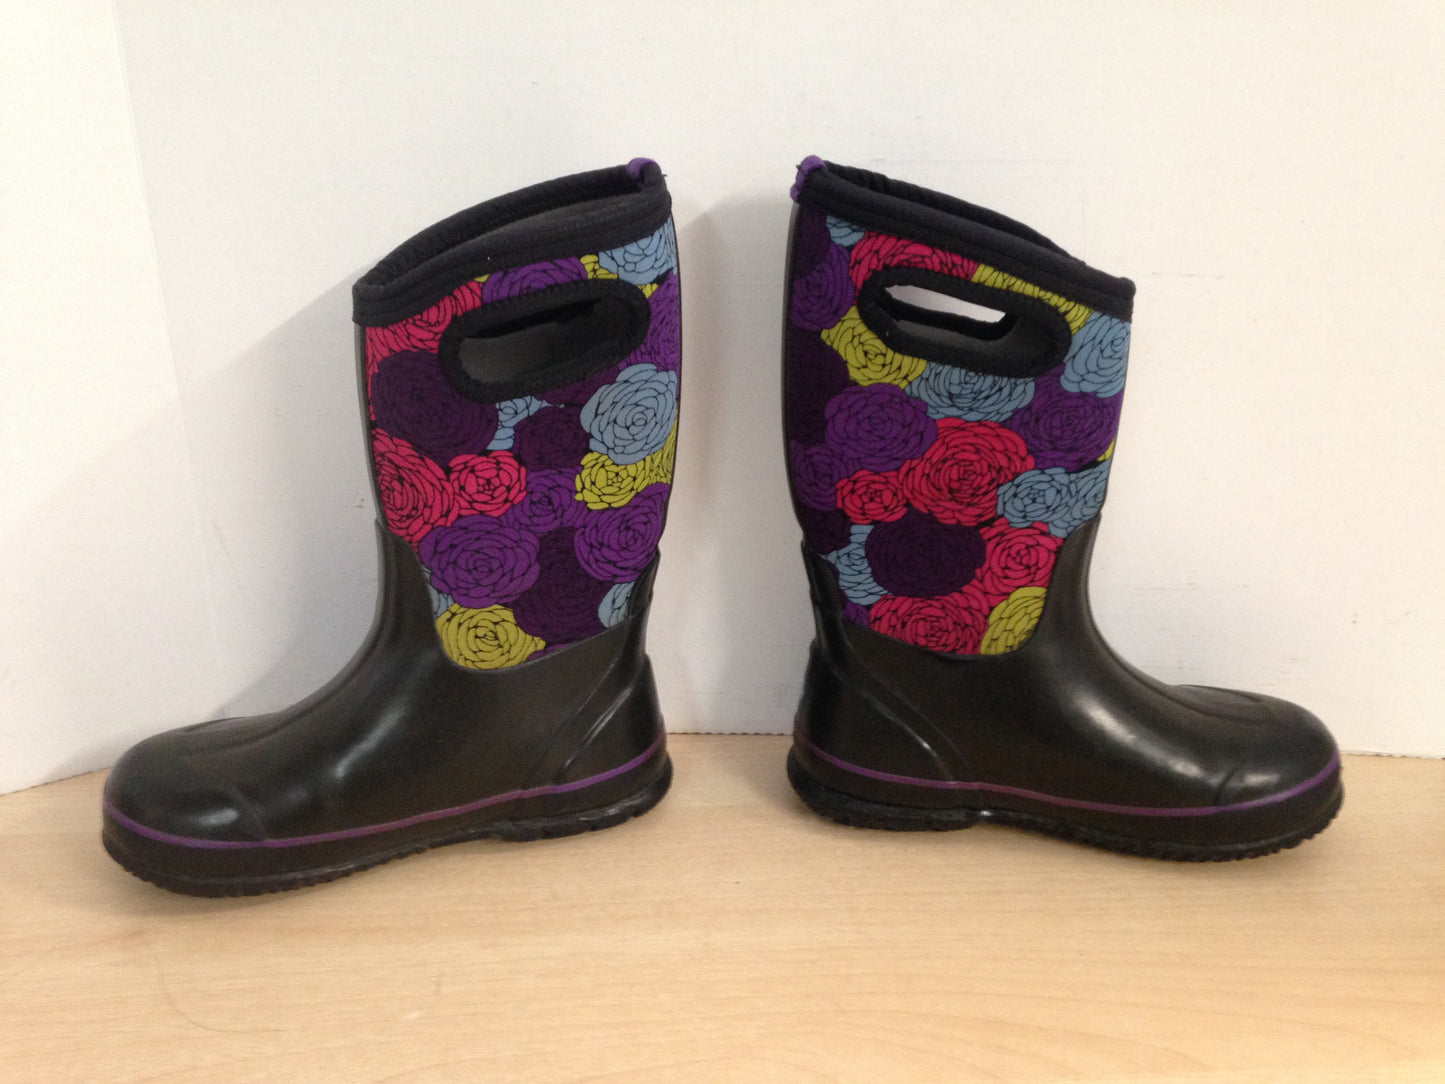 Bogs Brand Child Size 3 Pink Purple Flowers Multi to - 30 degree Winter Rain Excellent